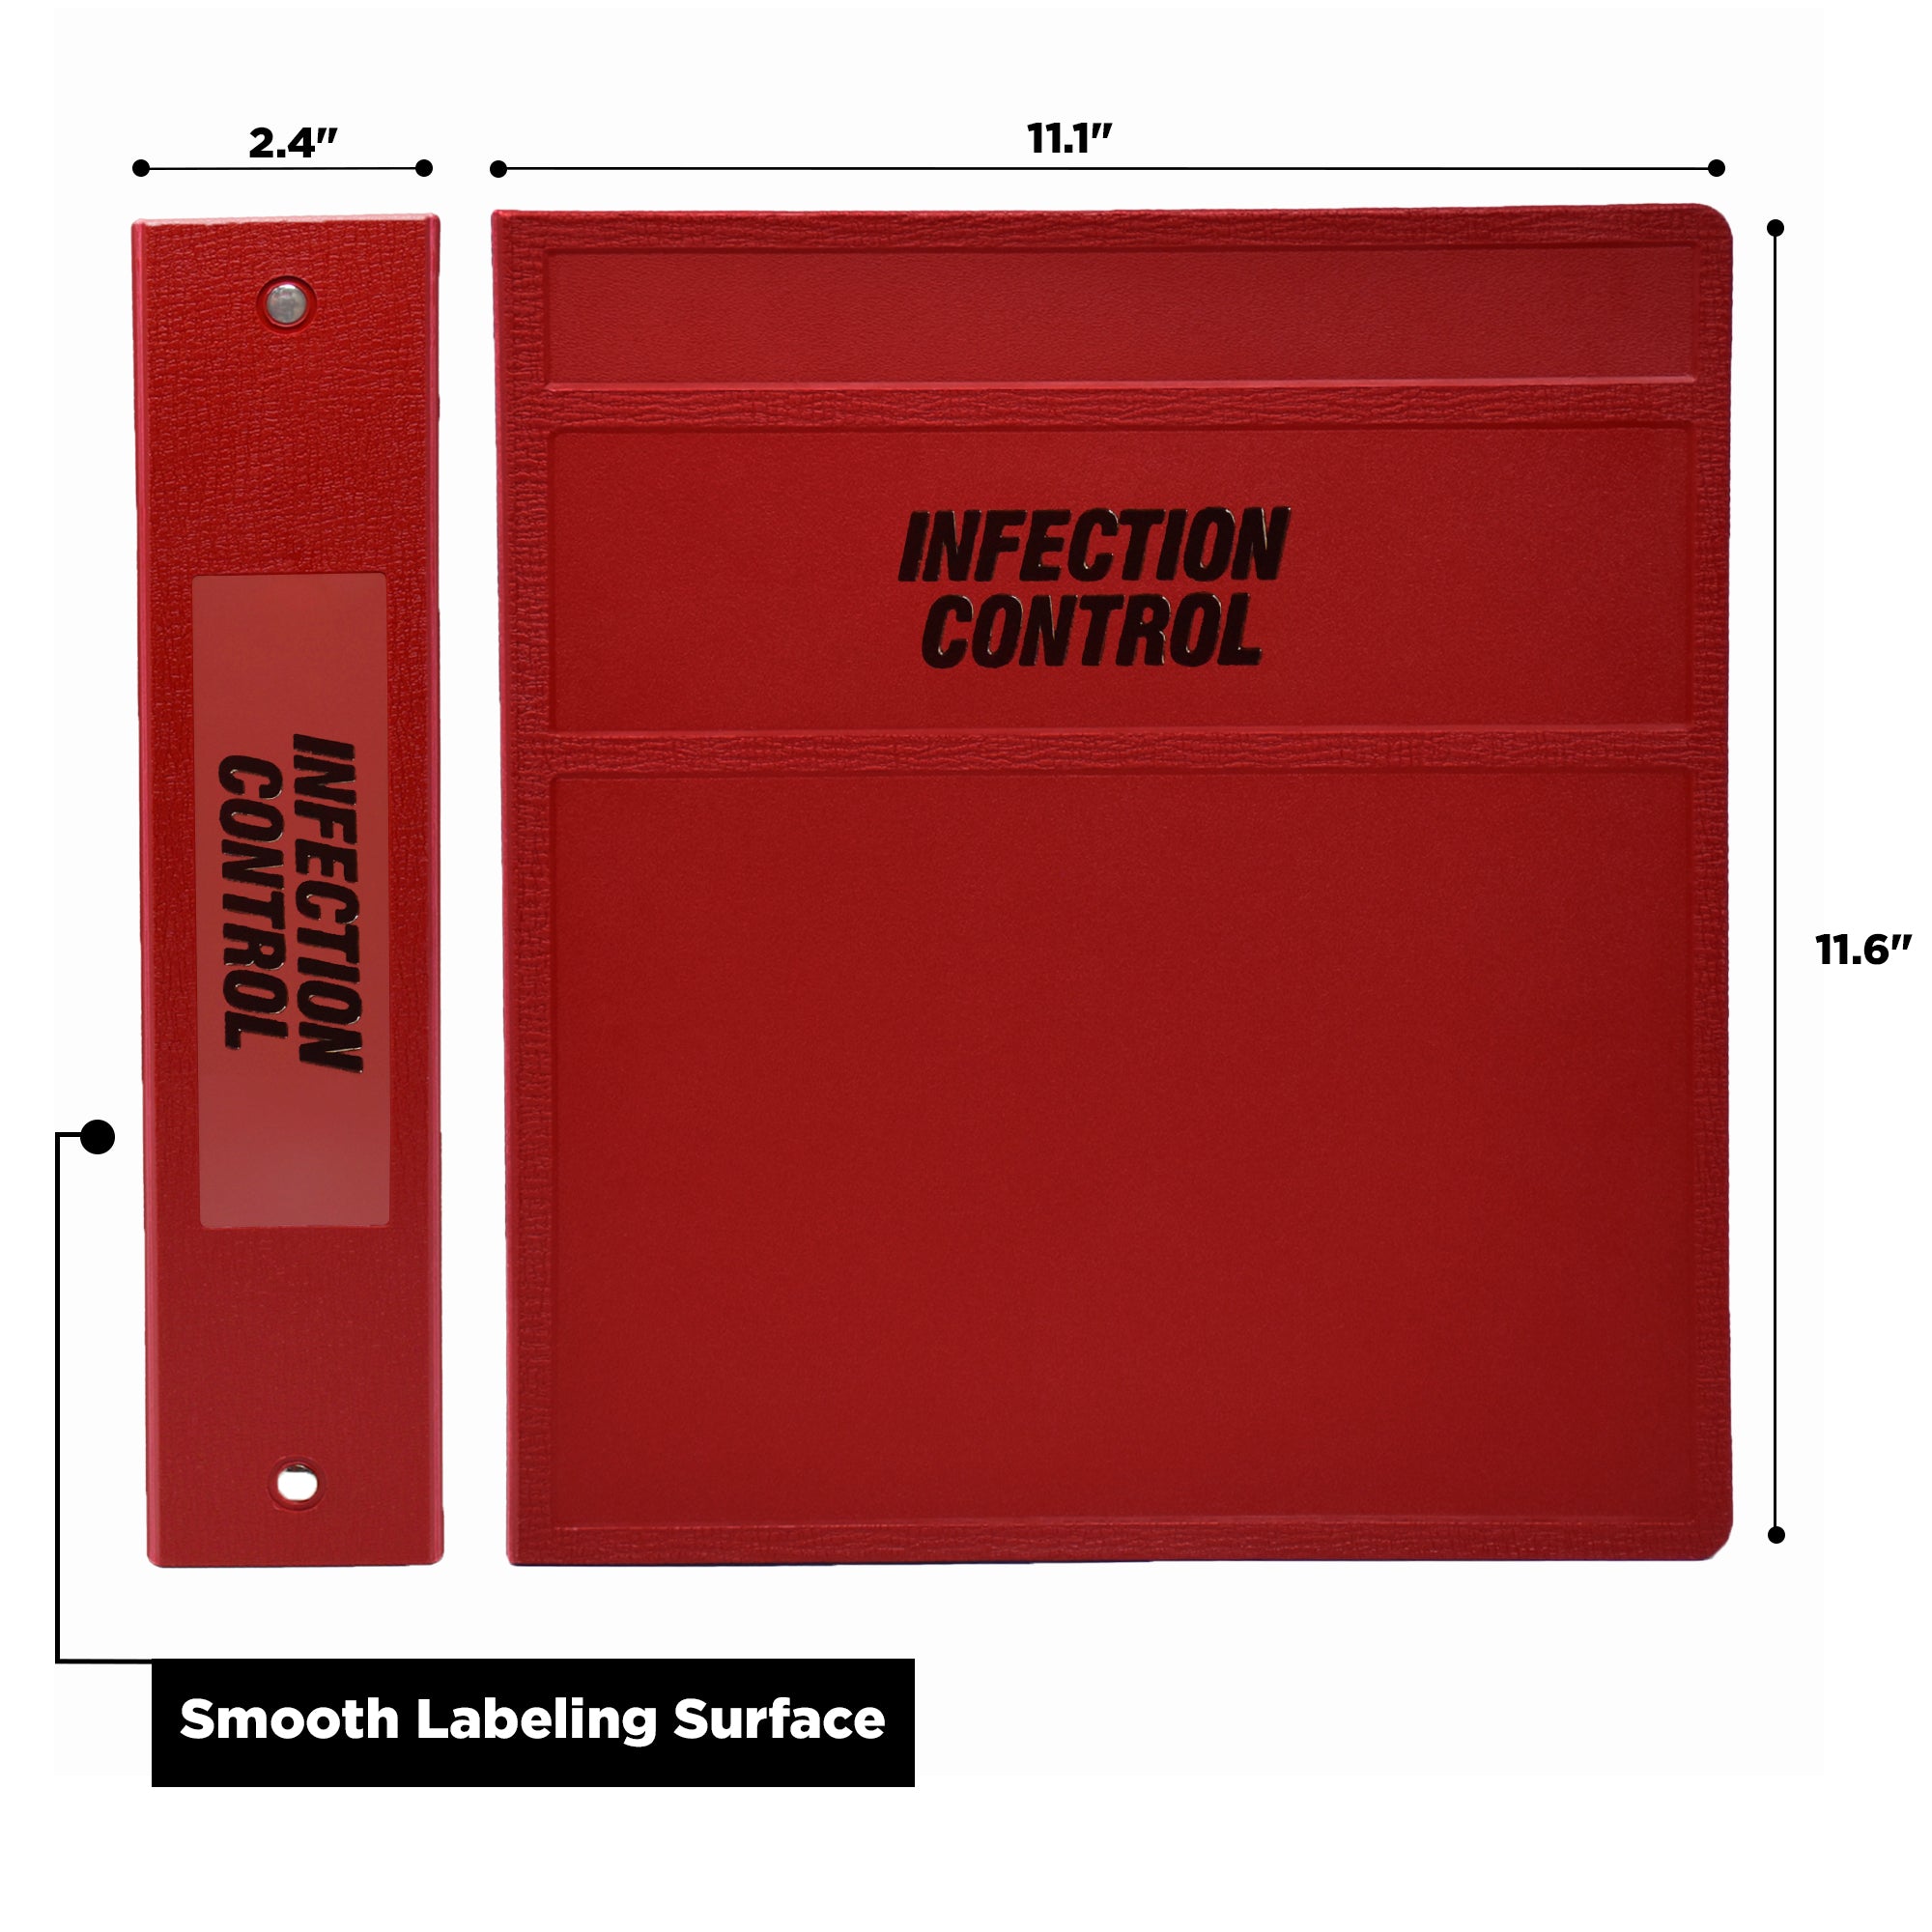 2-Inch Heavy Duty 3-Ring Binder for Infection Control Manual – Side Opening